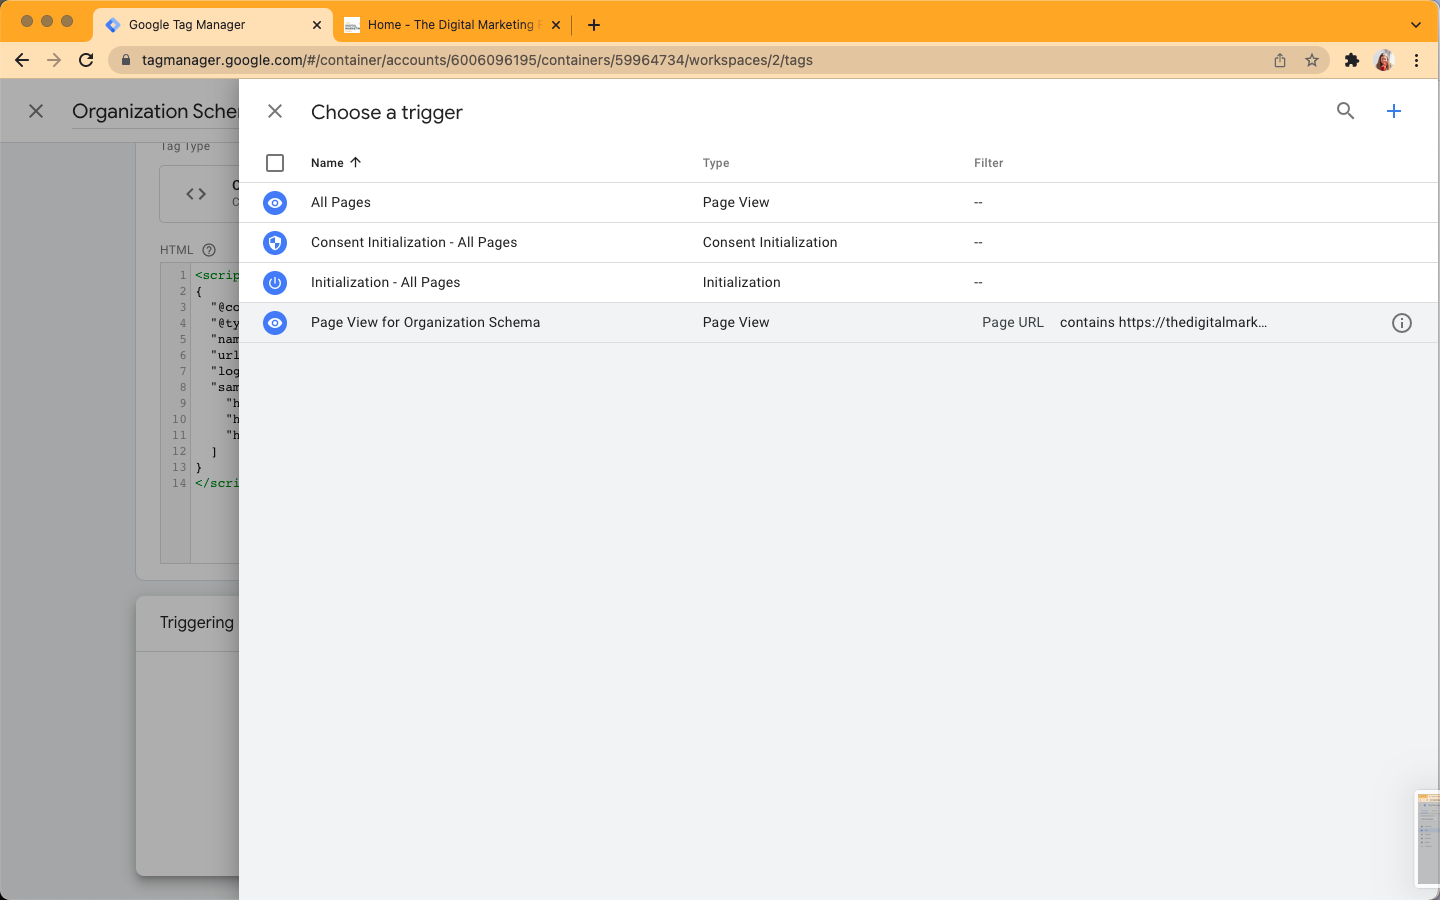 Google Tag Manager Schema Page View Trigger